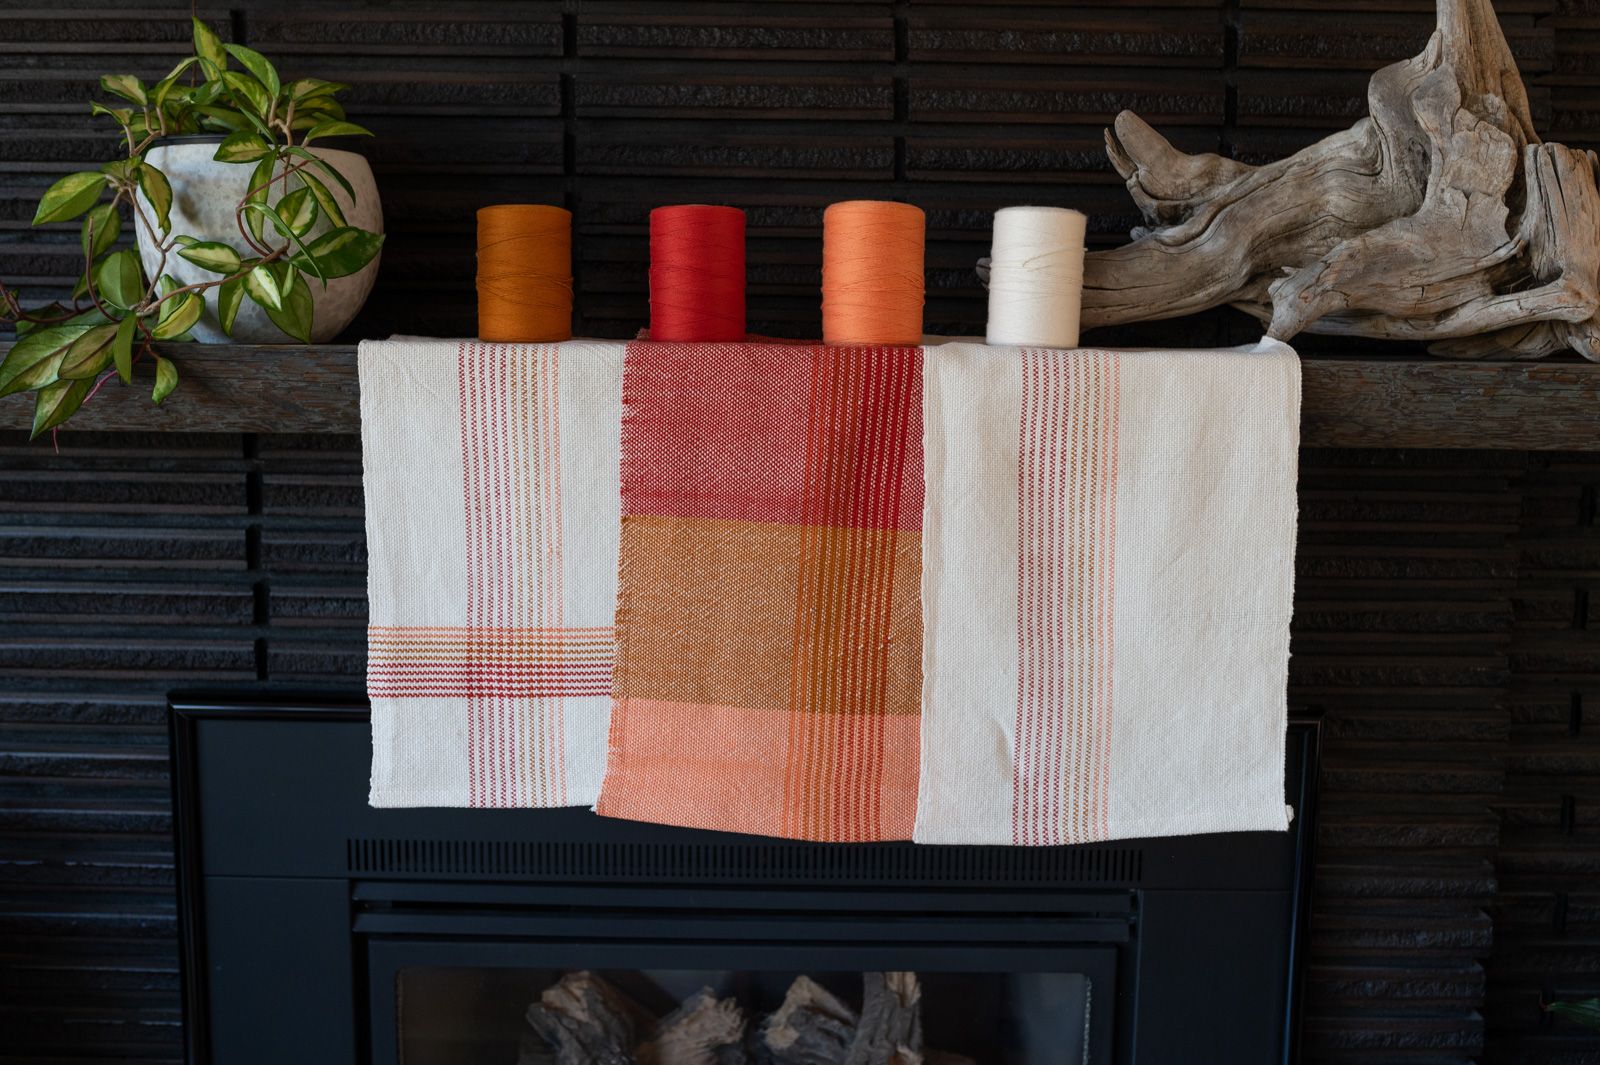 Rigid Heddle "Colour and Weave" Towels Kit